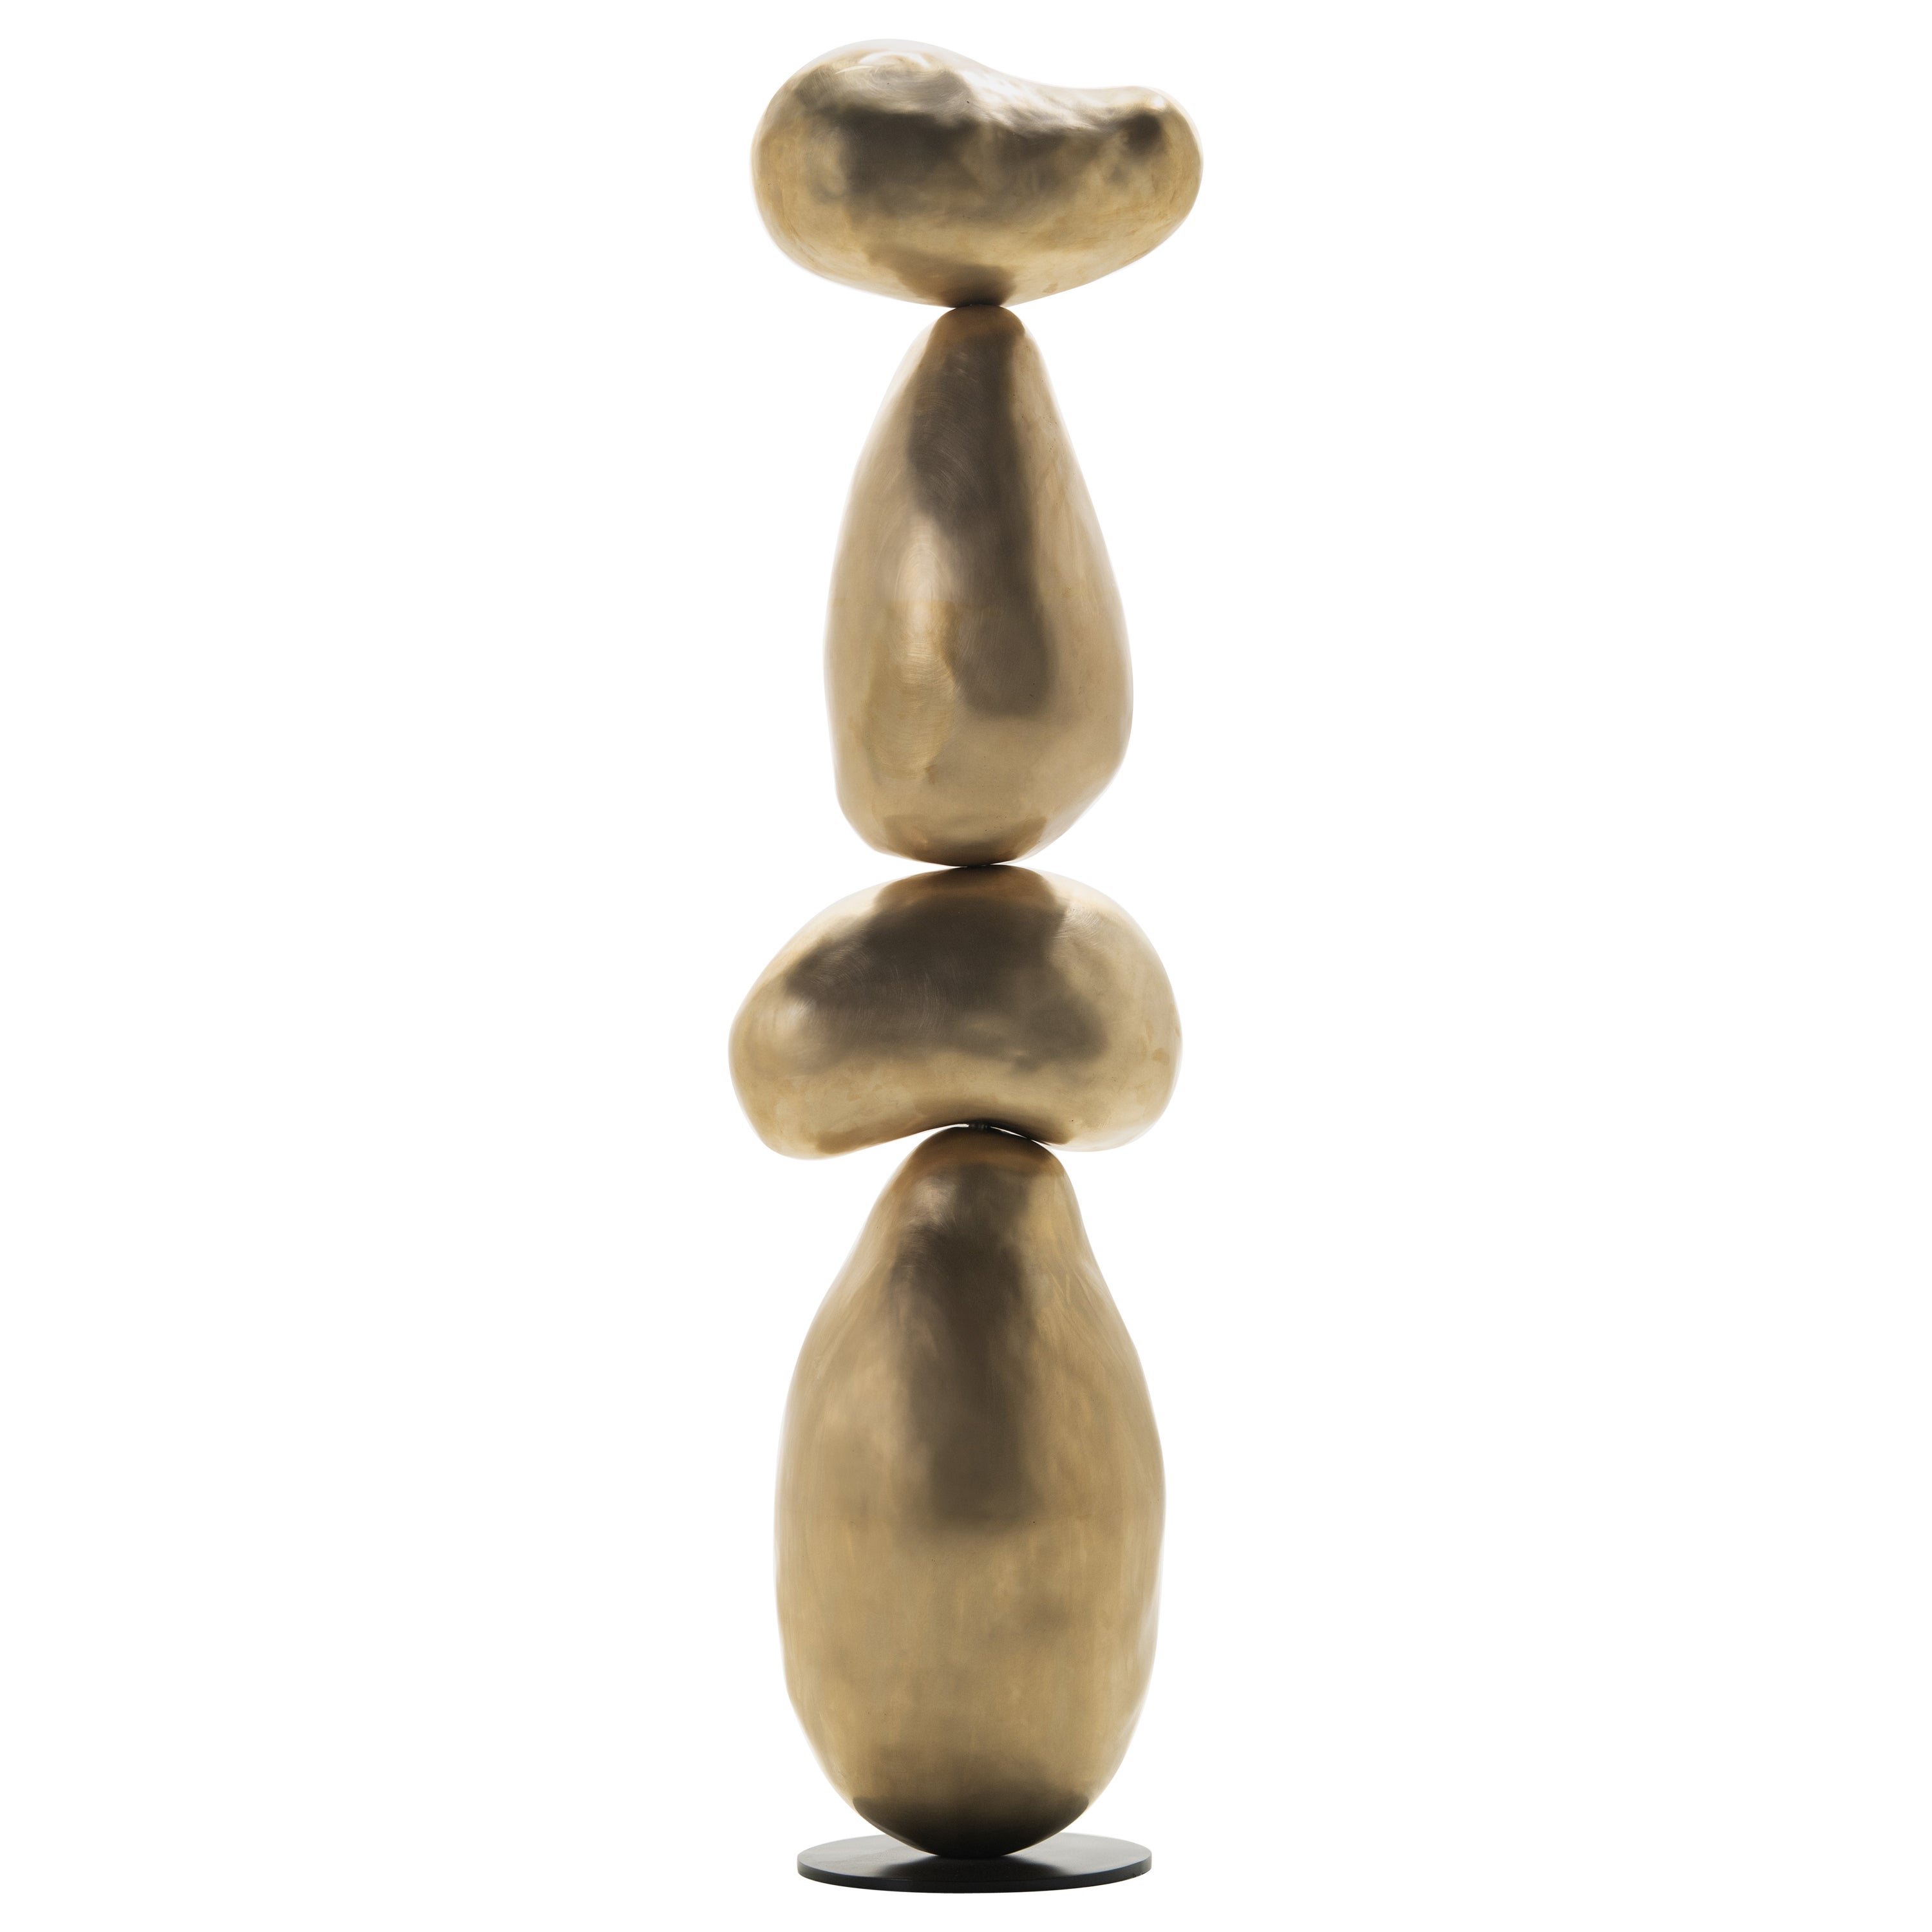 Limited Edition Totem Pole made in Pure Brass For Sale